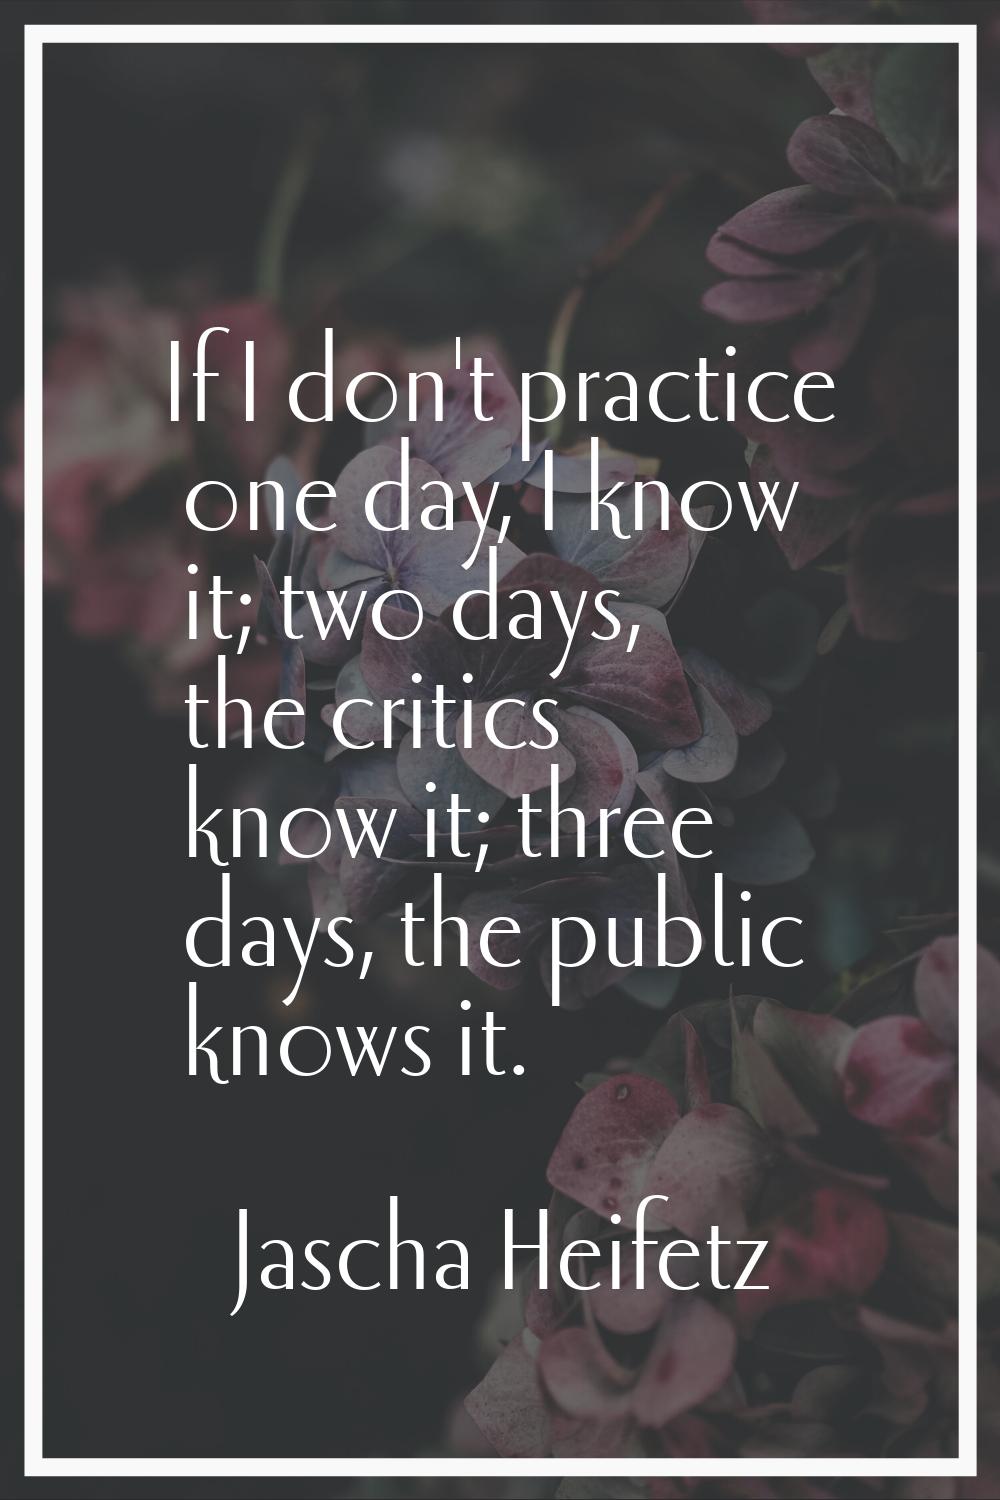 If I don't practice one day, I know it; two days, the critics know it; three days, the public knows